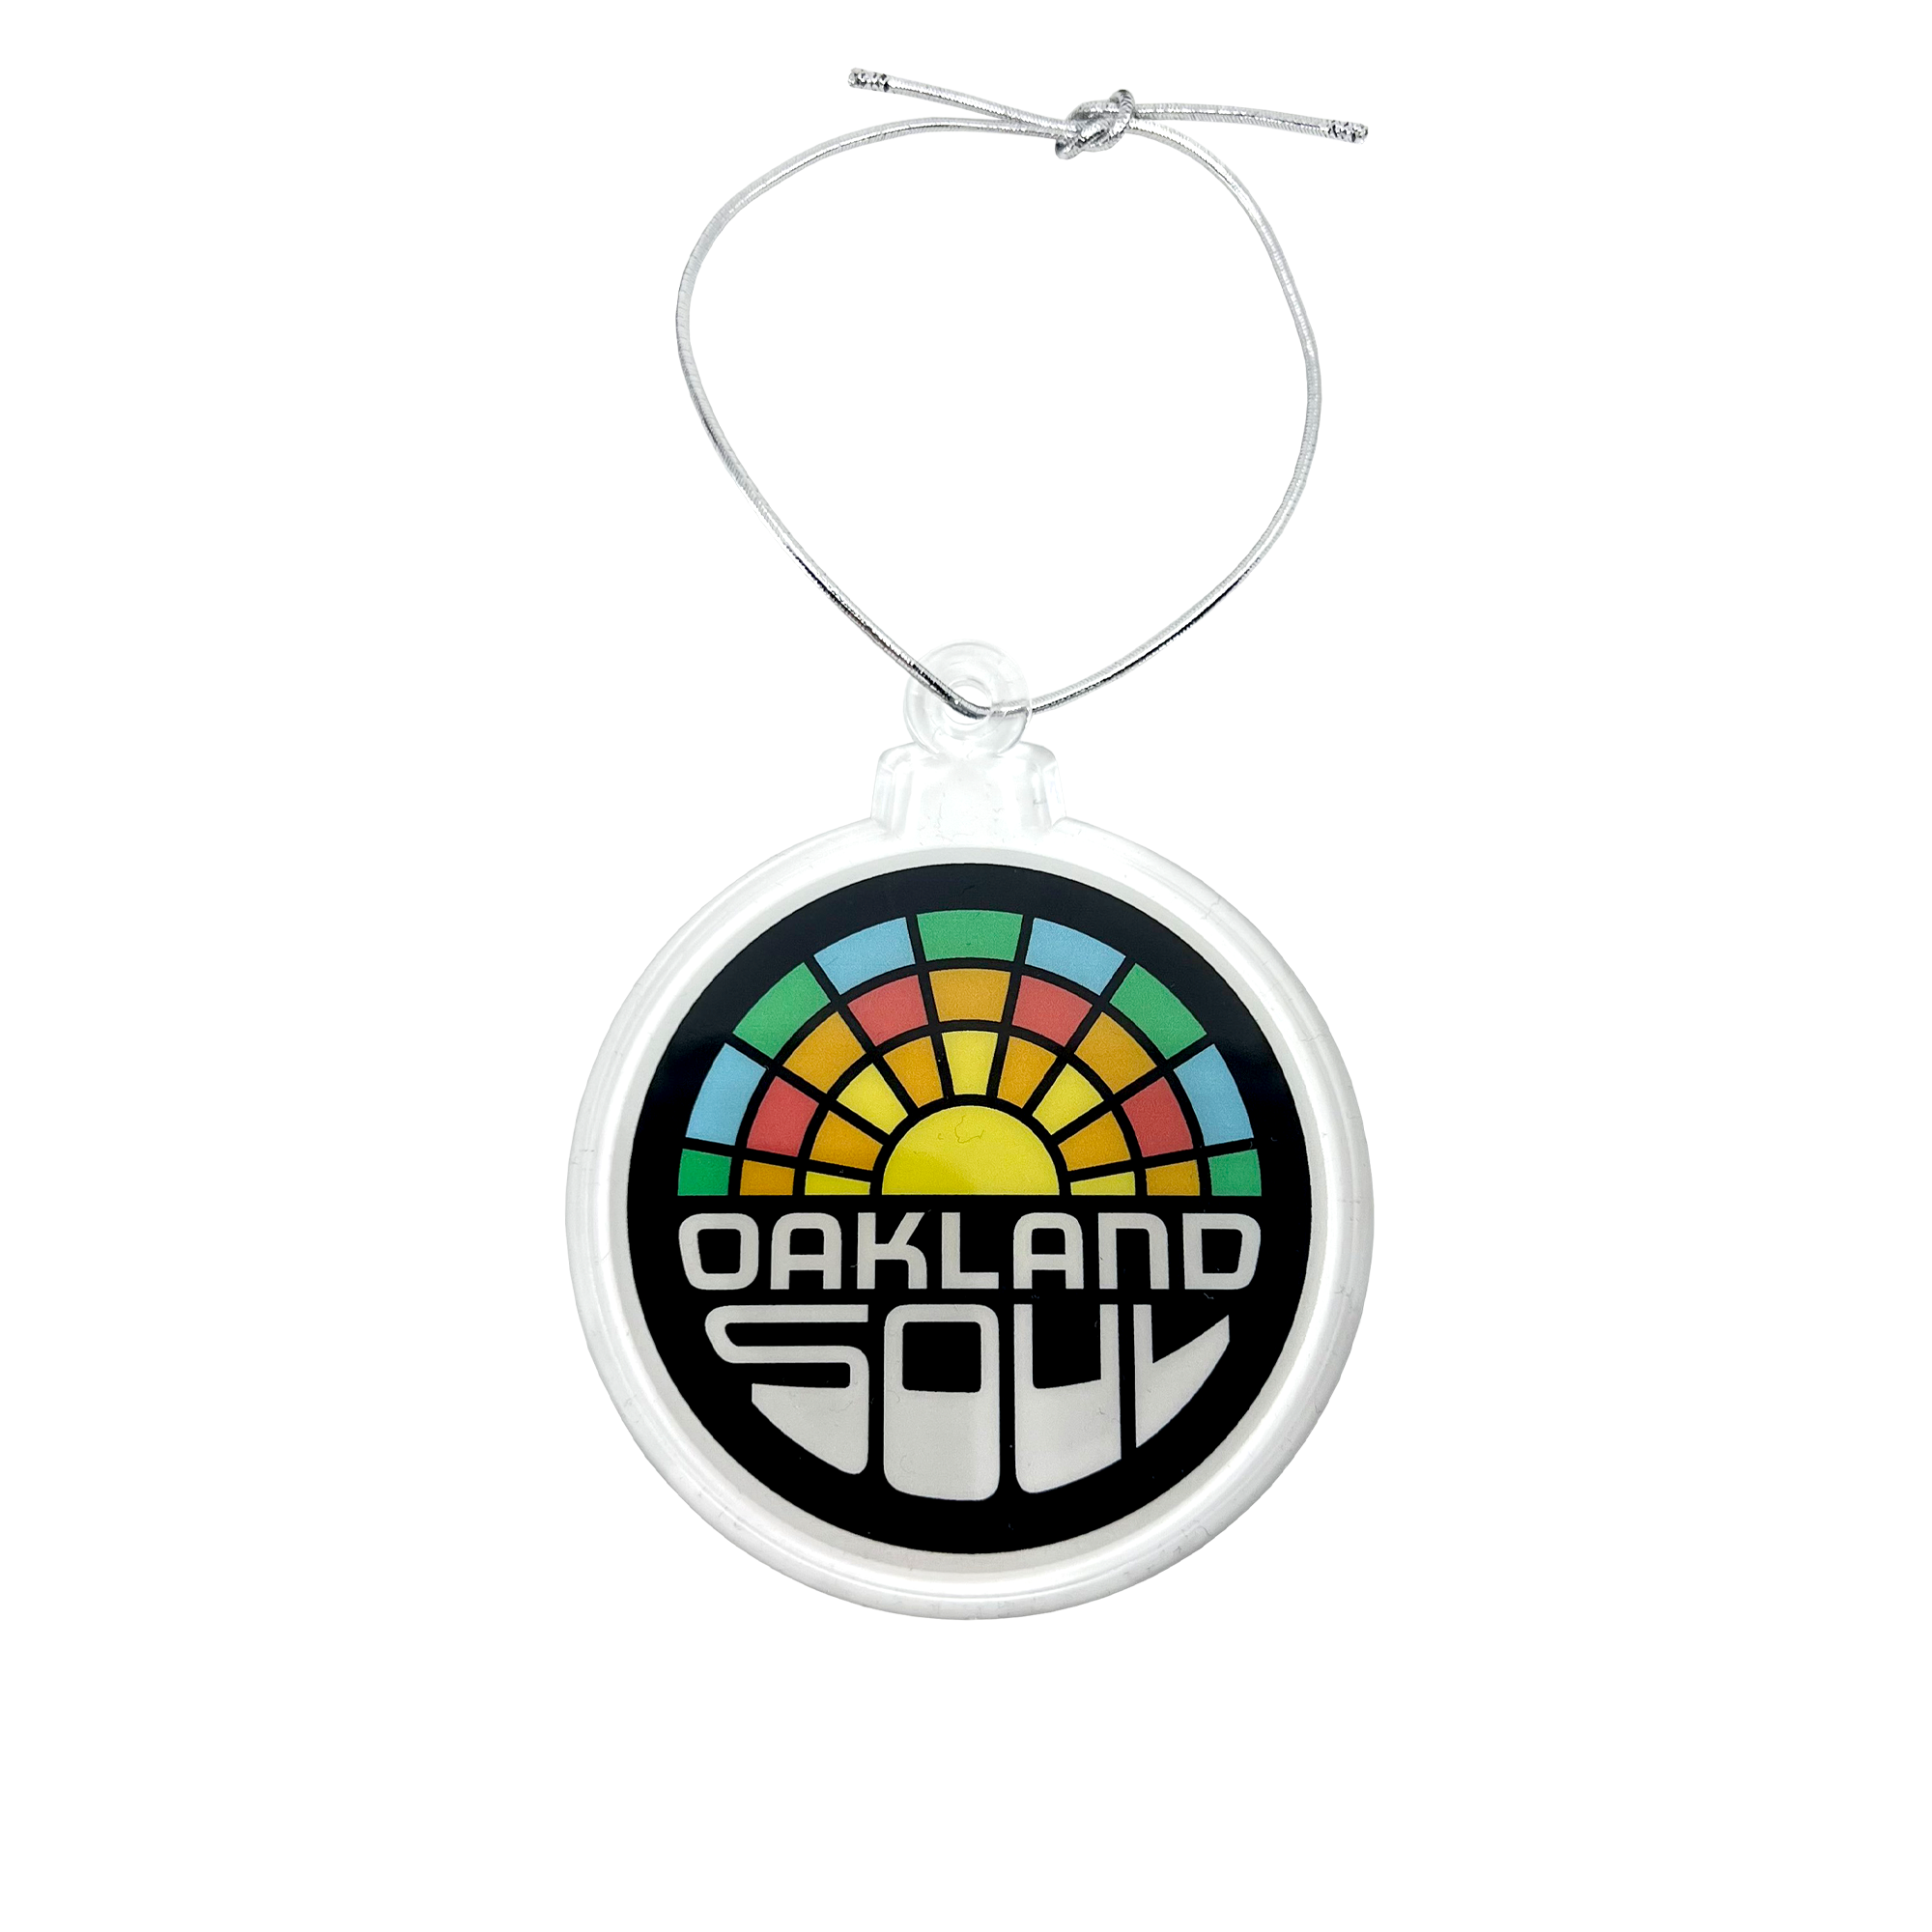 Full-color Oakland soul crest  on a holiday tree ornament with silver string.